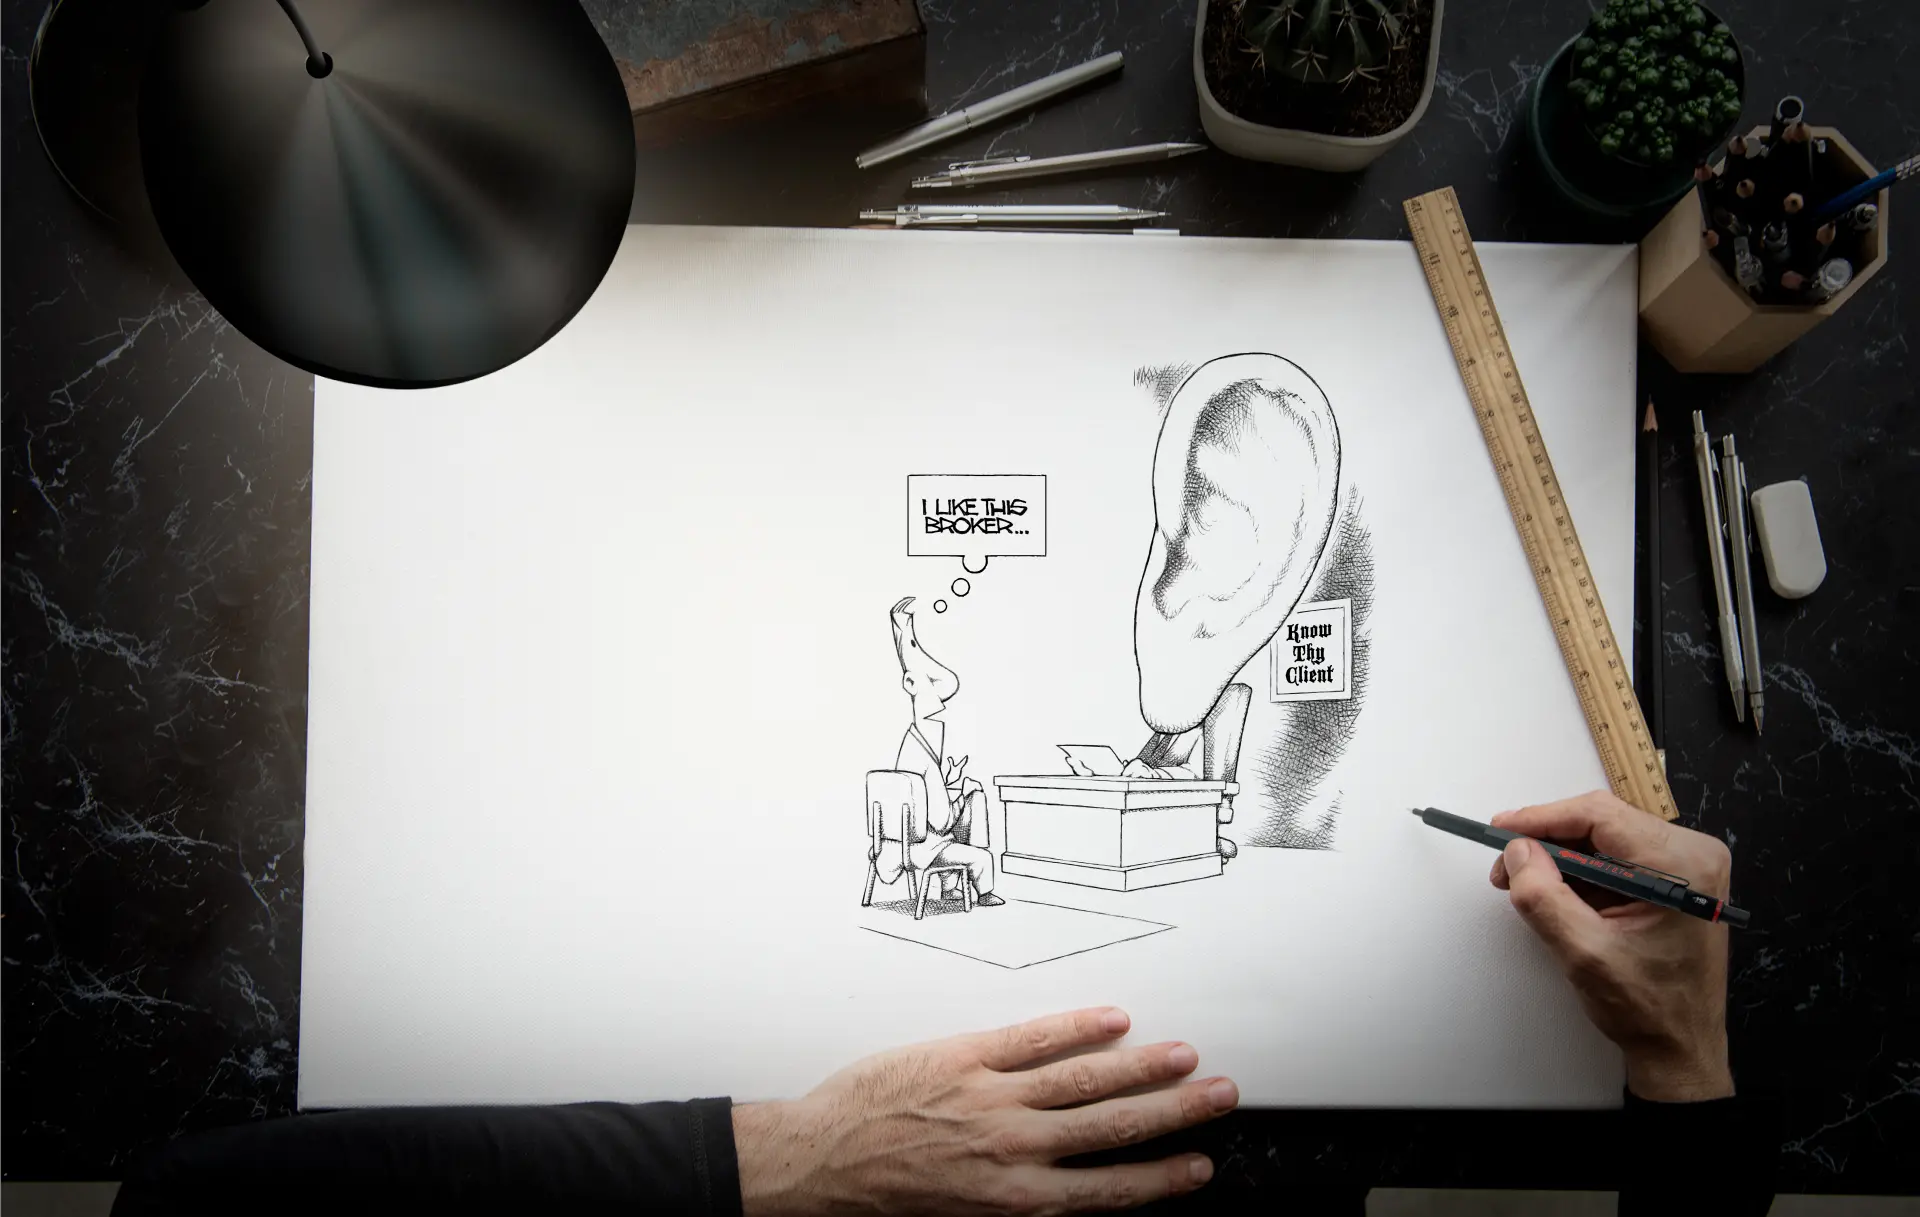 Artist's desk illuminated by a table-lamp, with artist's hands visible in frame as he draws an illustration using a Rotring pencil.